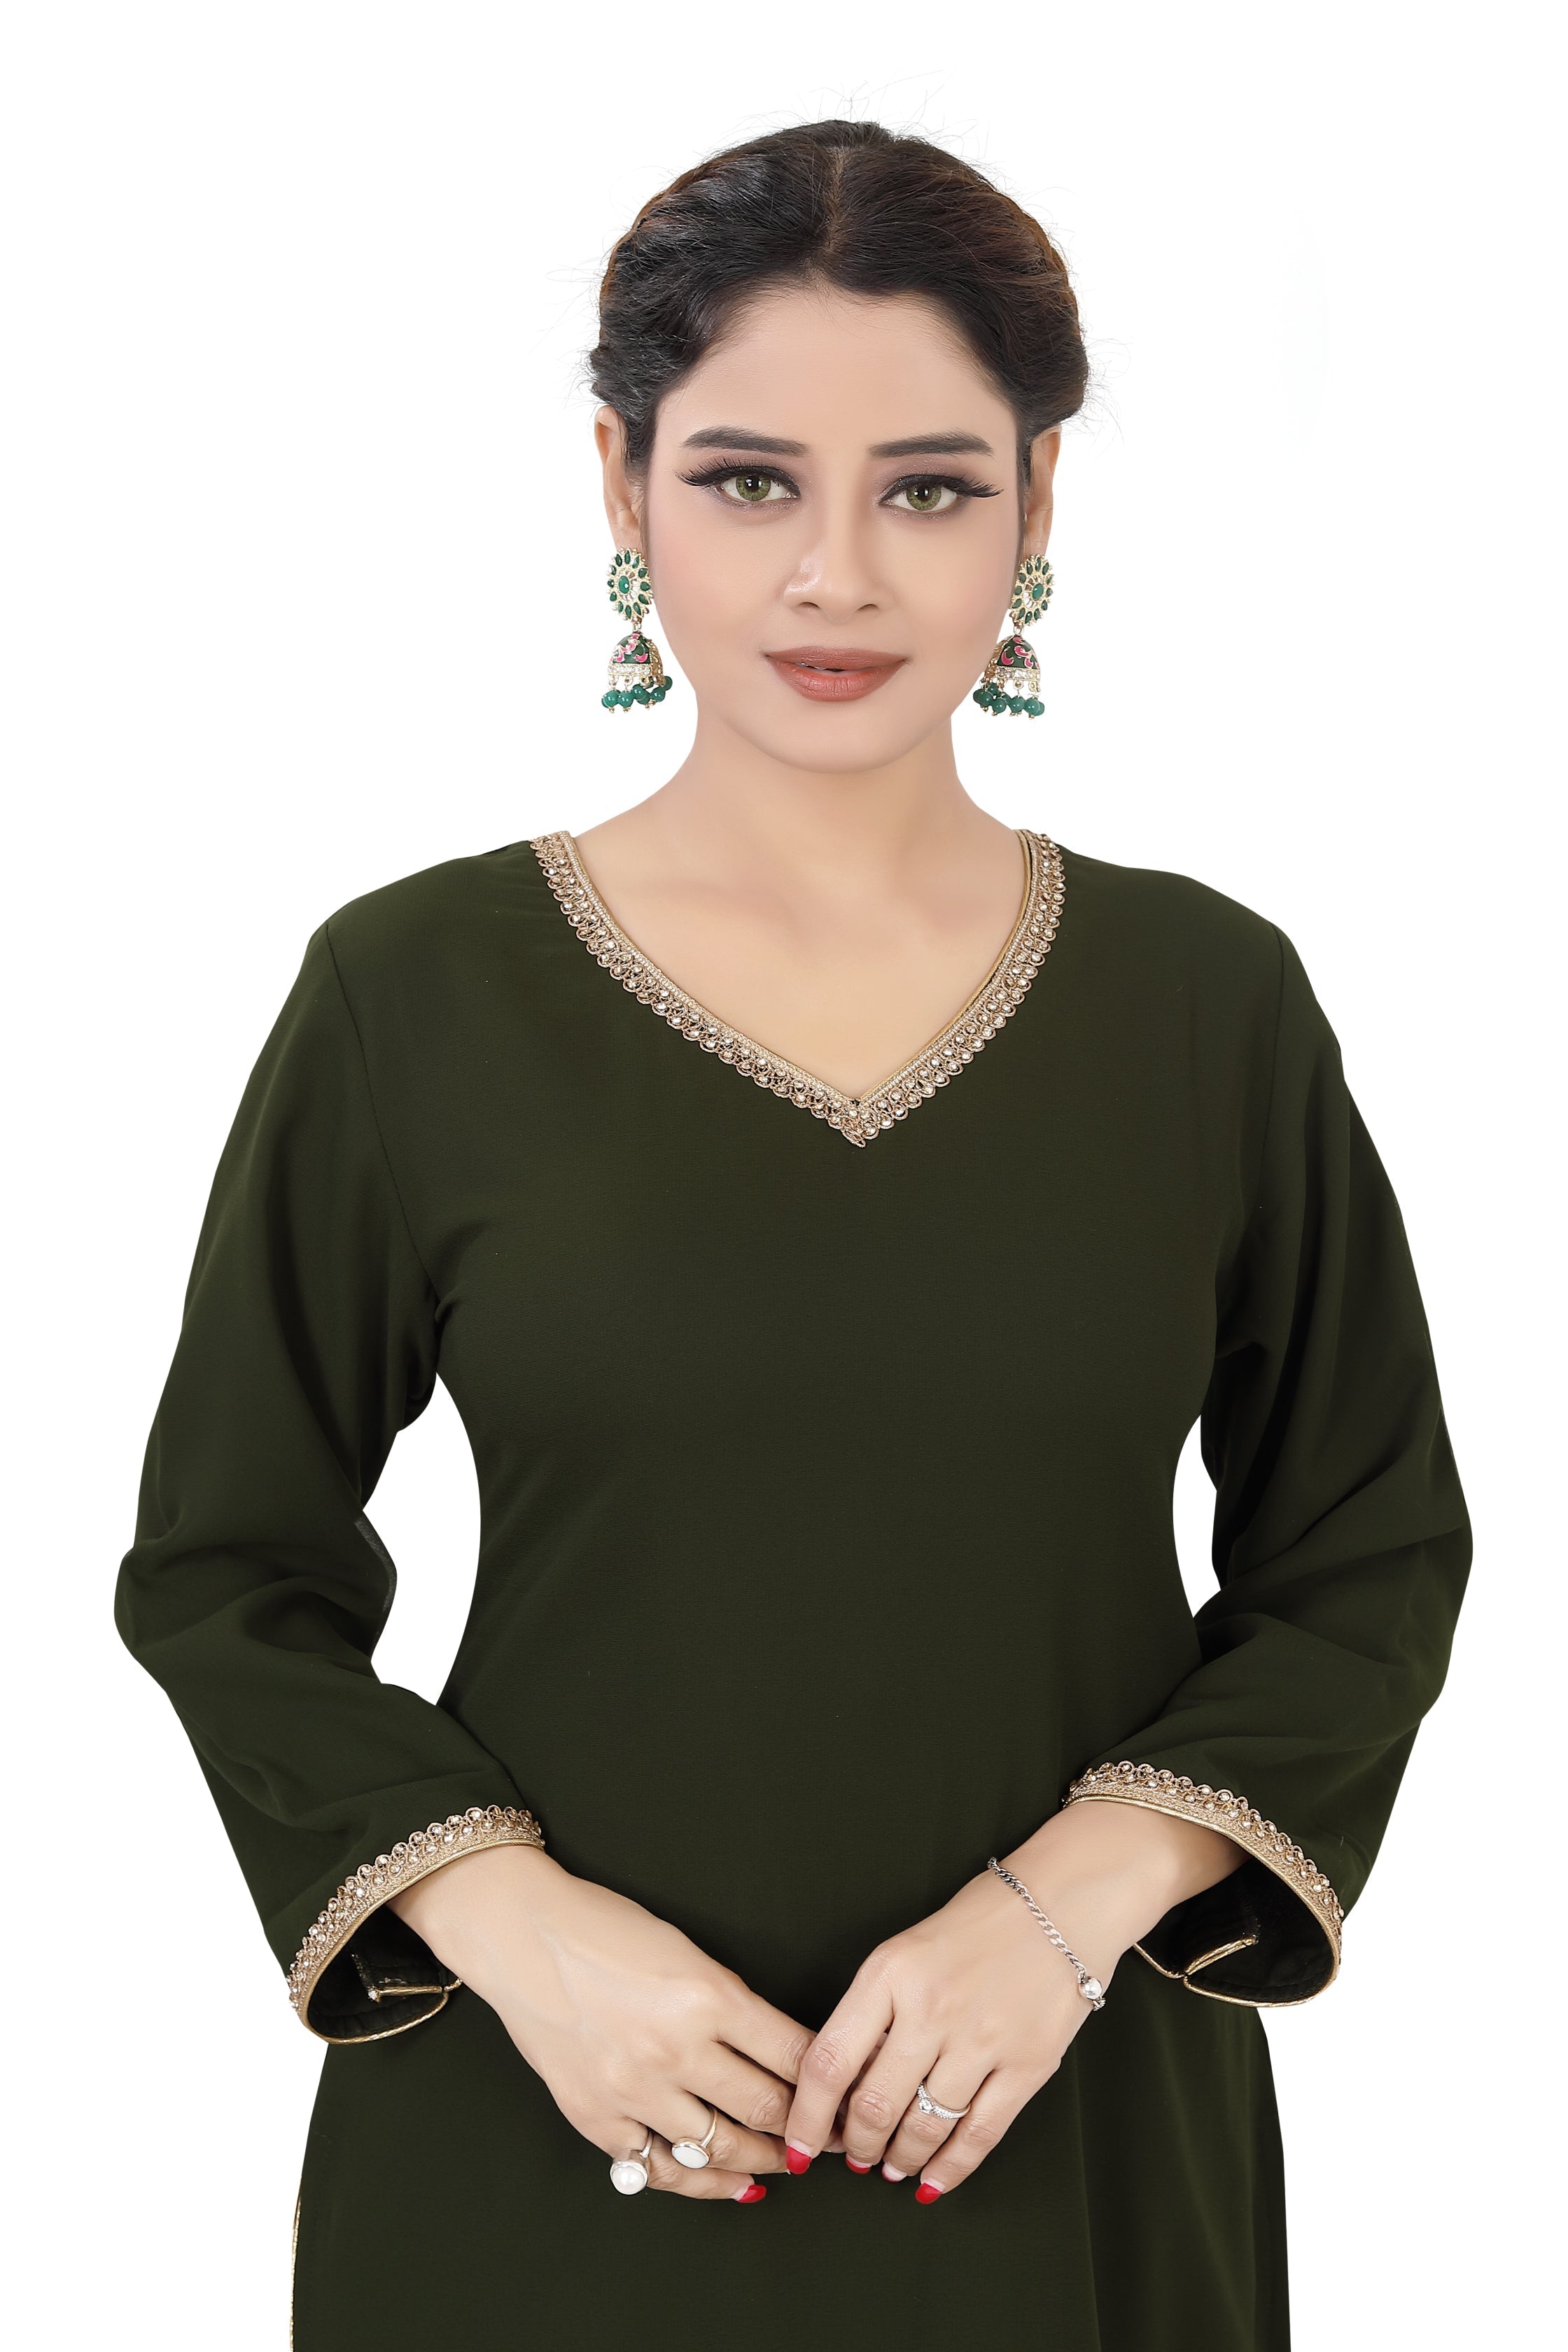 Olive Green Colour Top Dhoti Suit